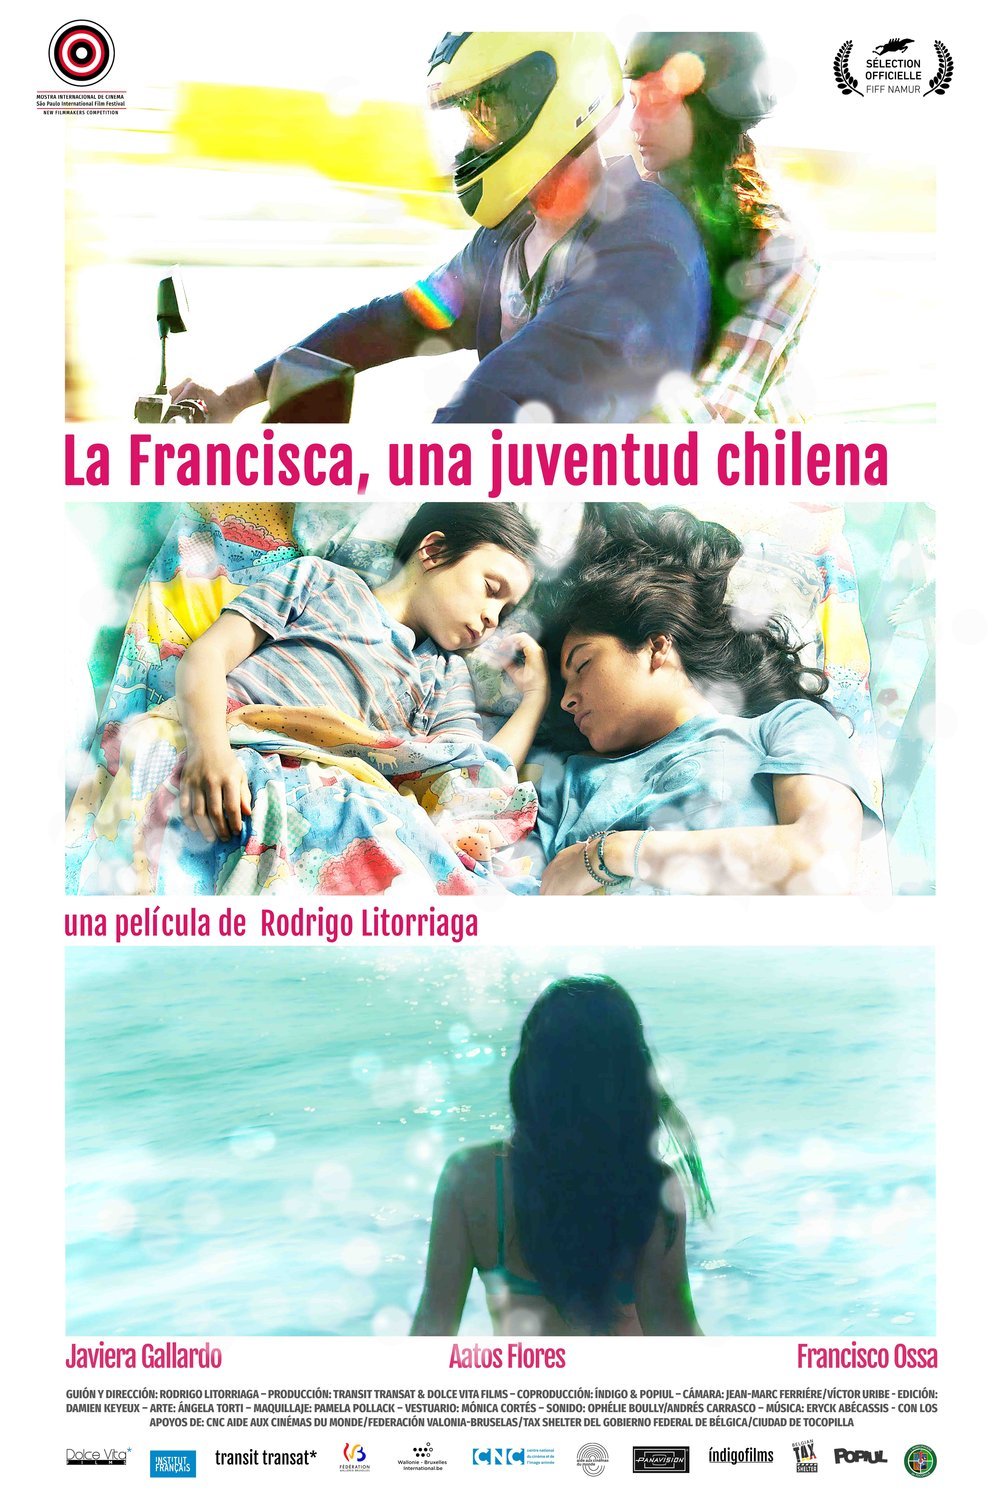 Spanish poster of the movie La Francisca, a Chilean Youth